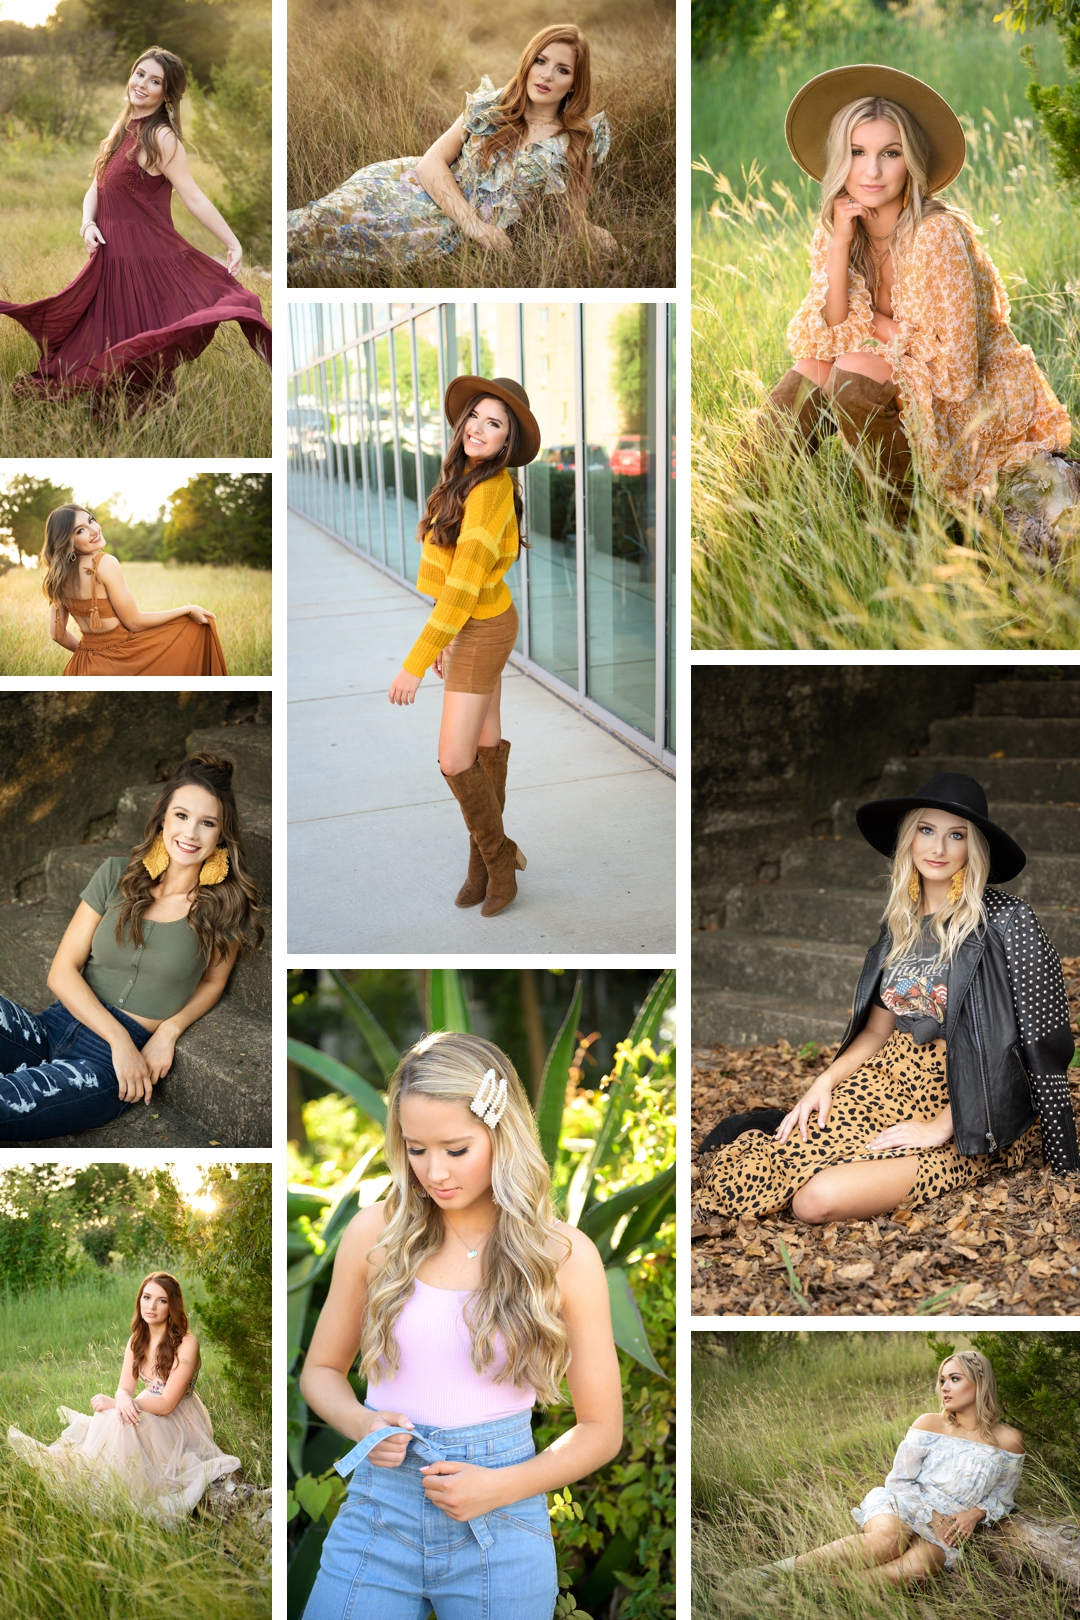 When should I book my senior session?